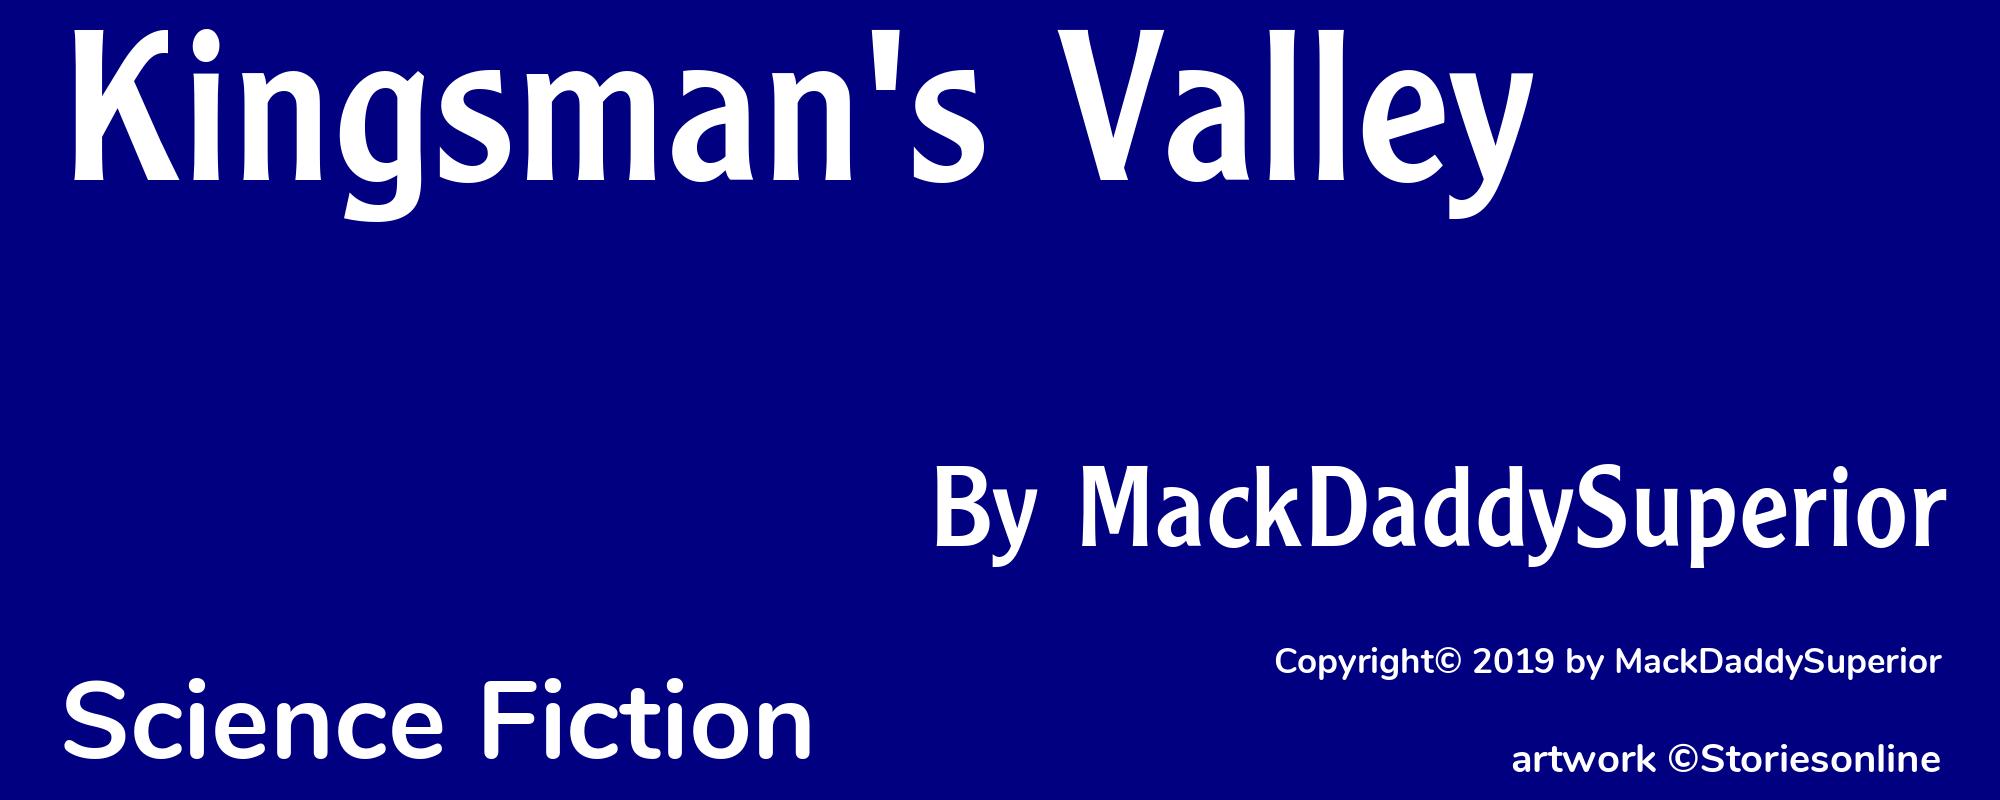 Kingsman's Valley - Cover